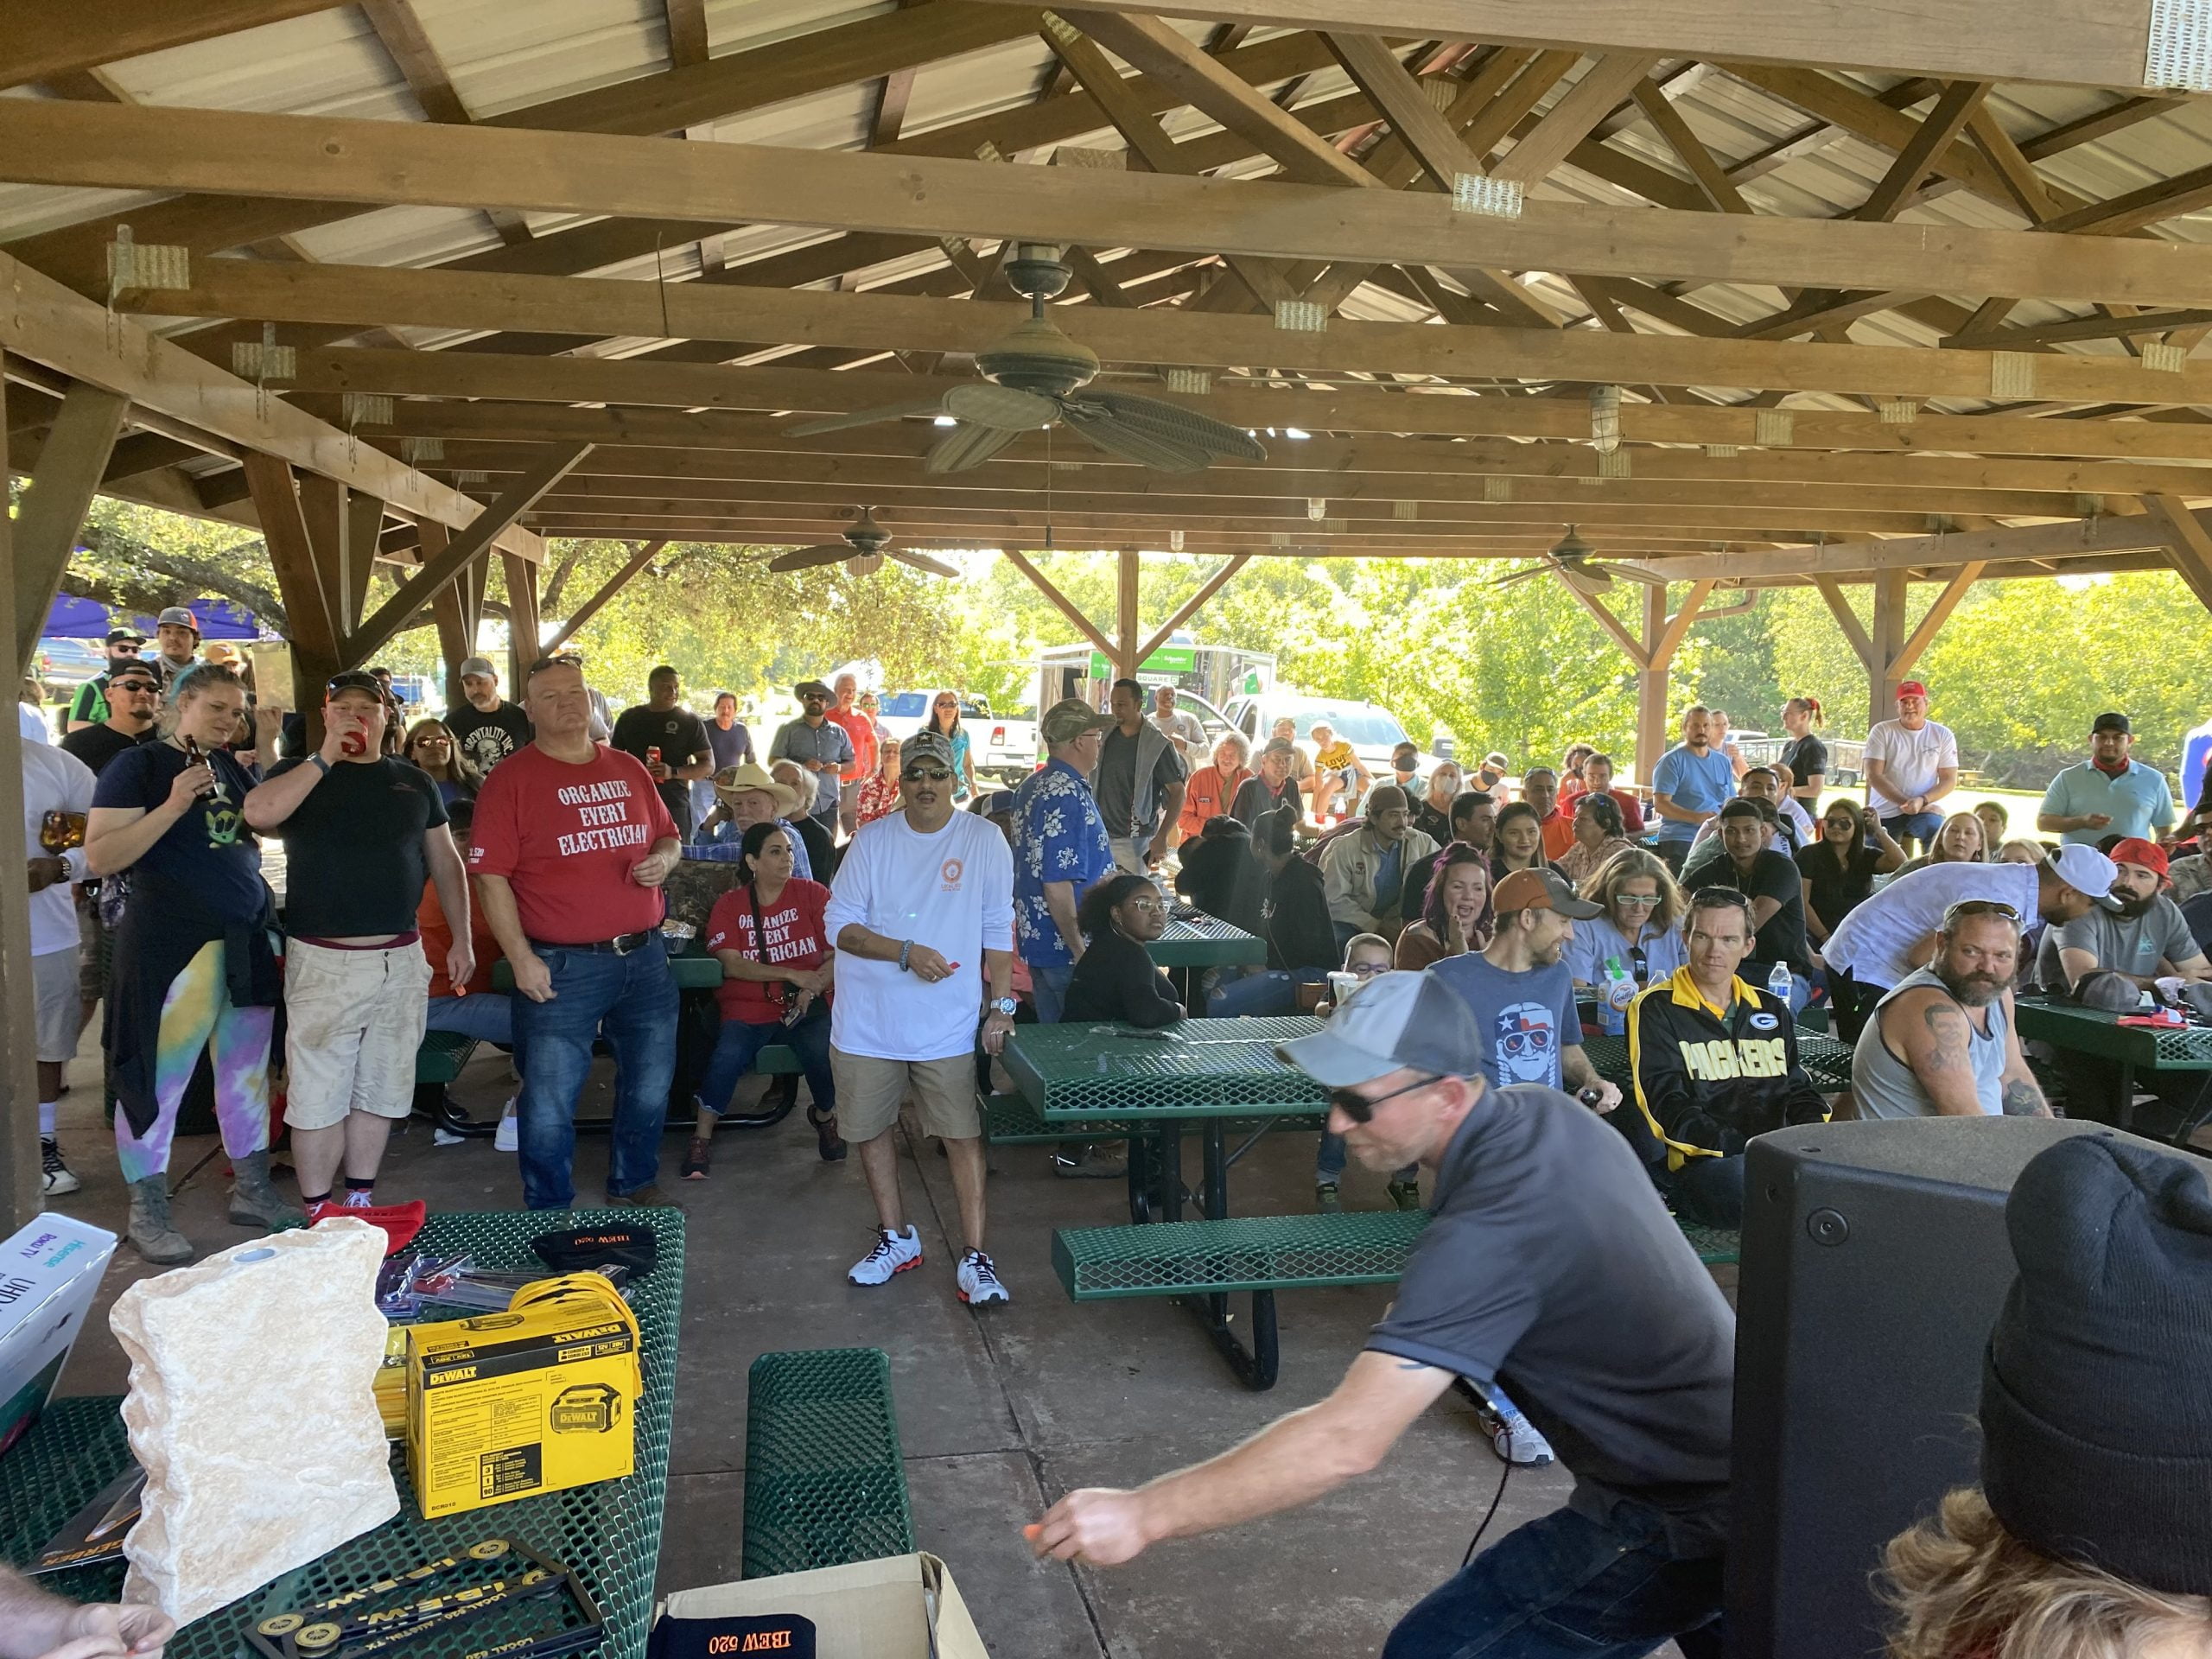 Good Times, Great Turn Out At Annual Picnic